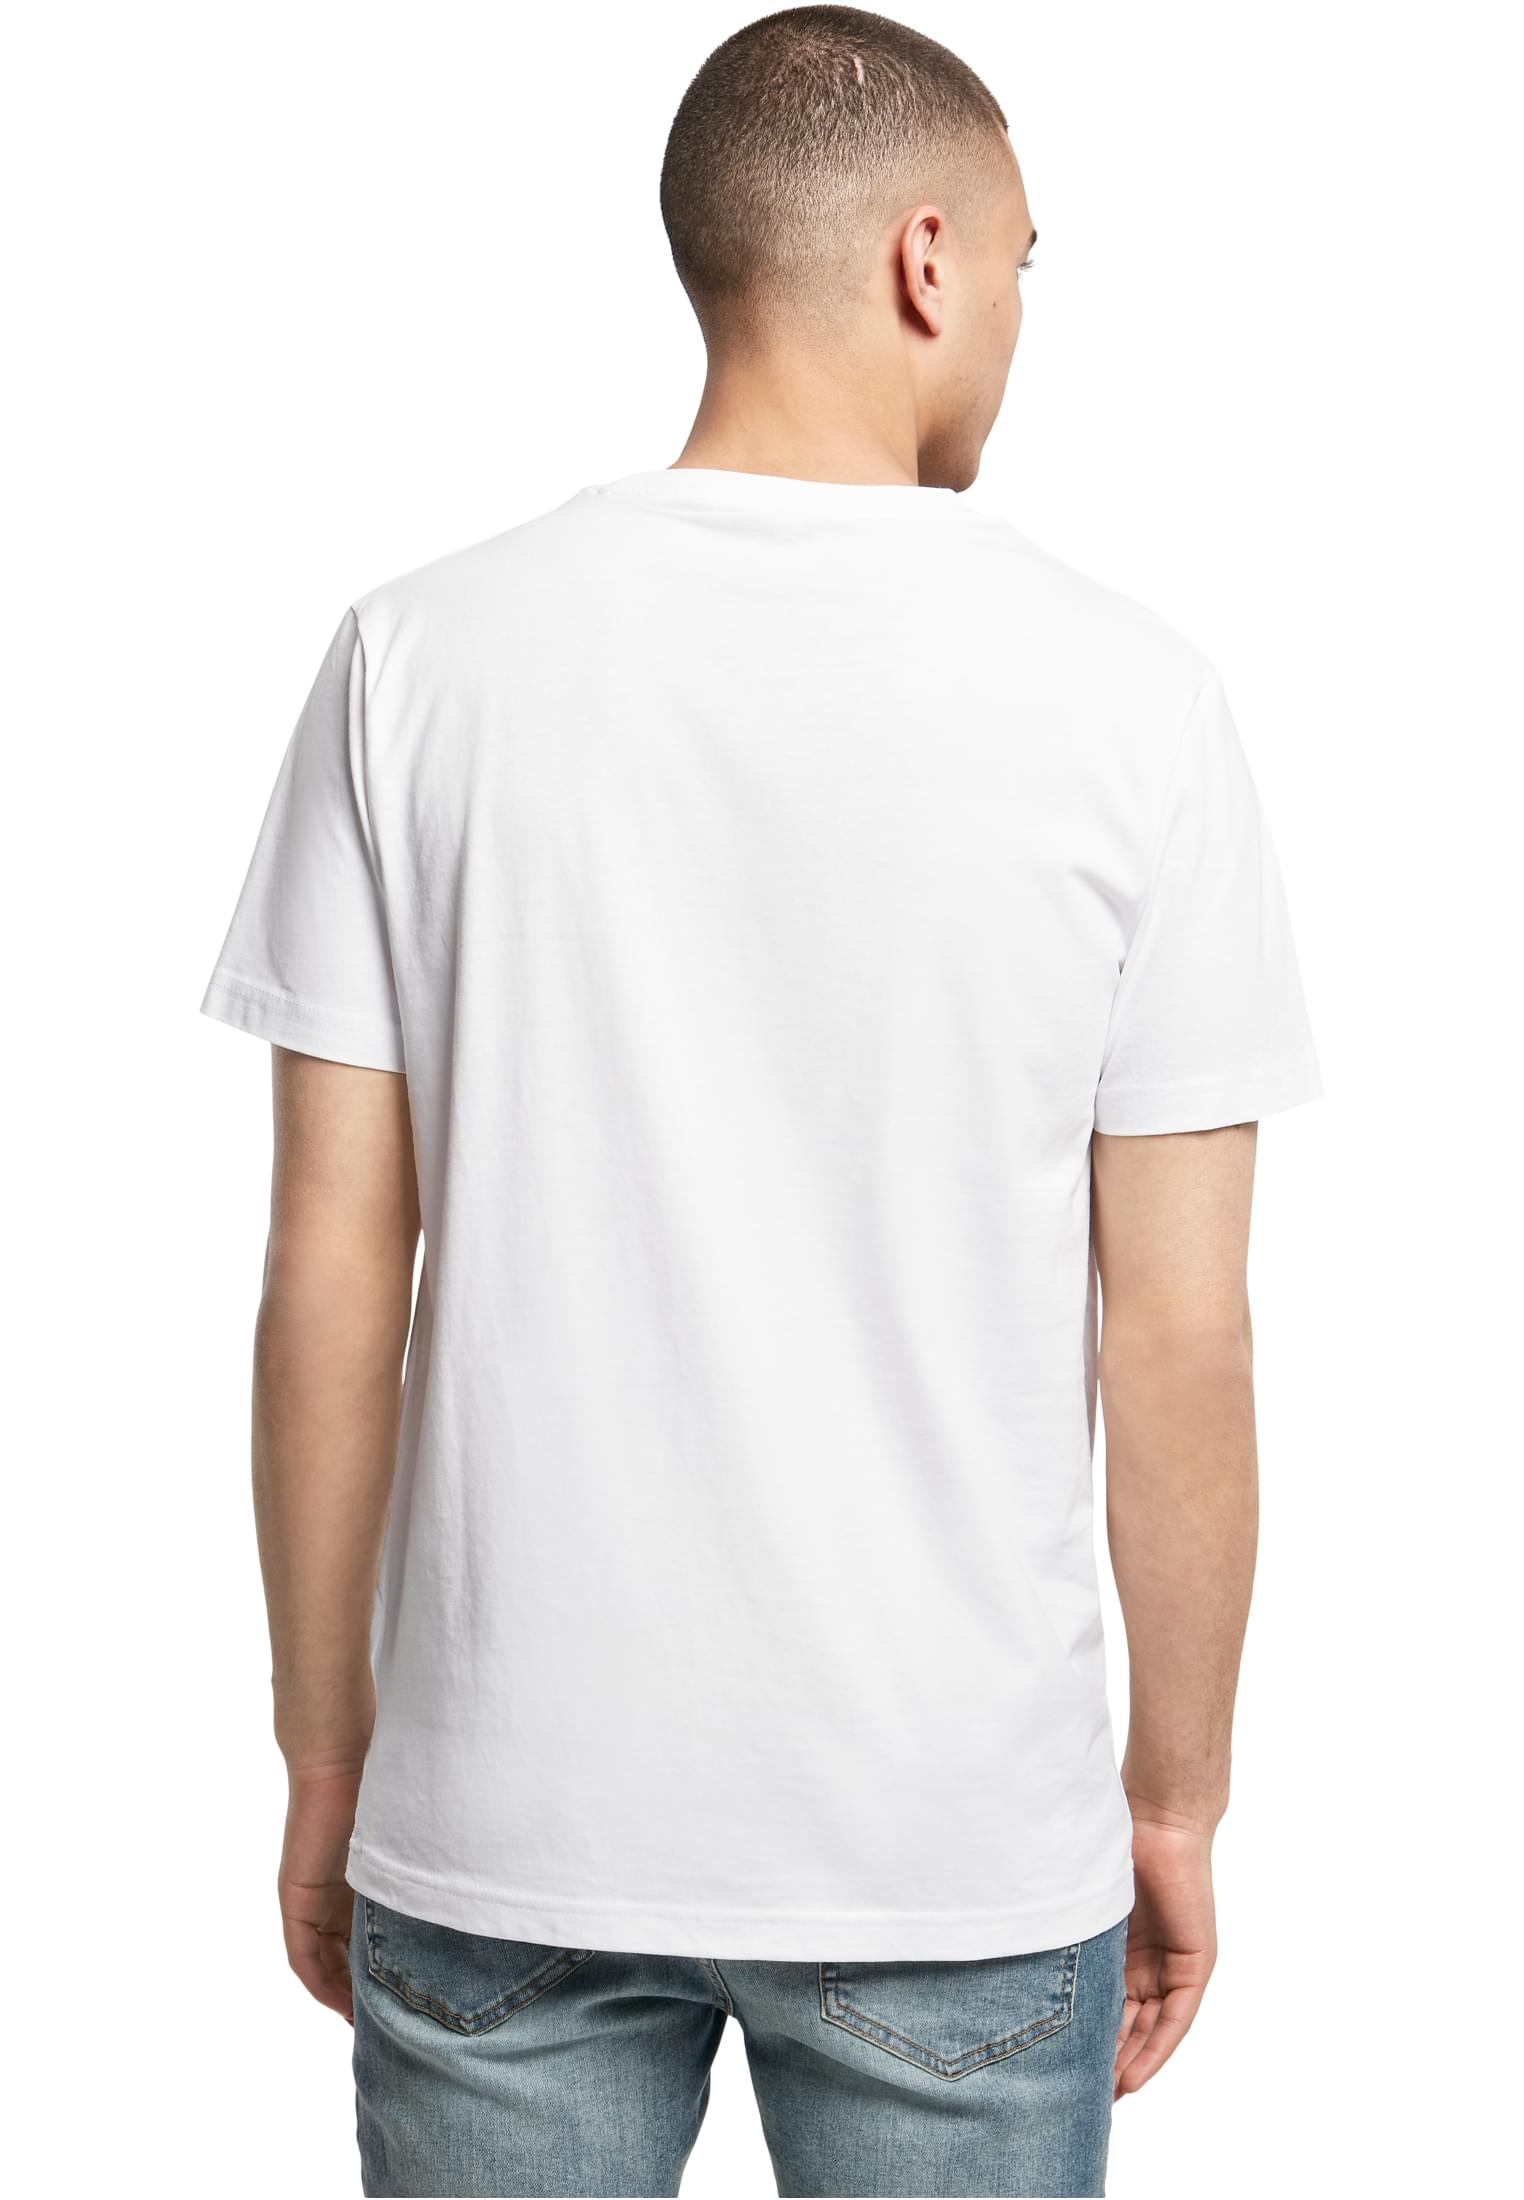 Mister Tee Employee T-Shirt white im BAWRZ® One Stop Hip-Hop Shop